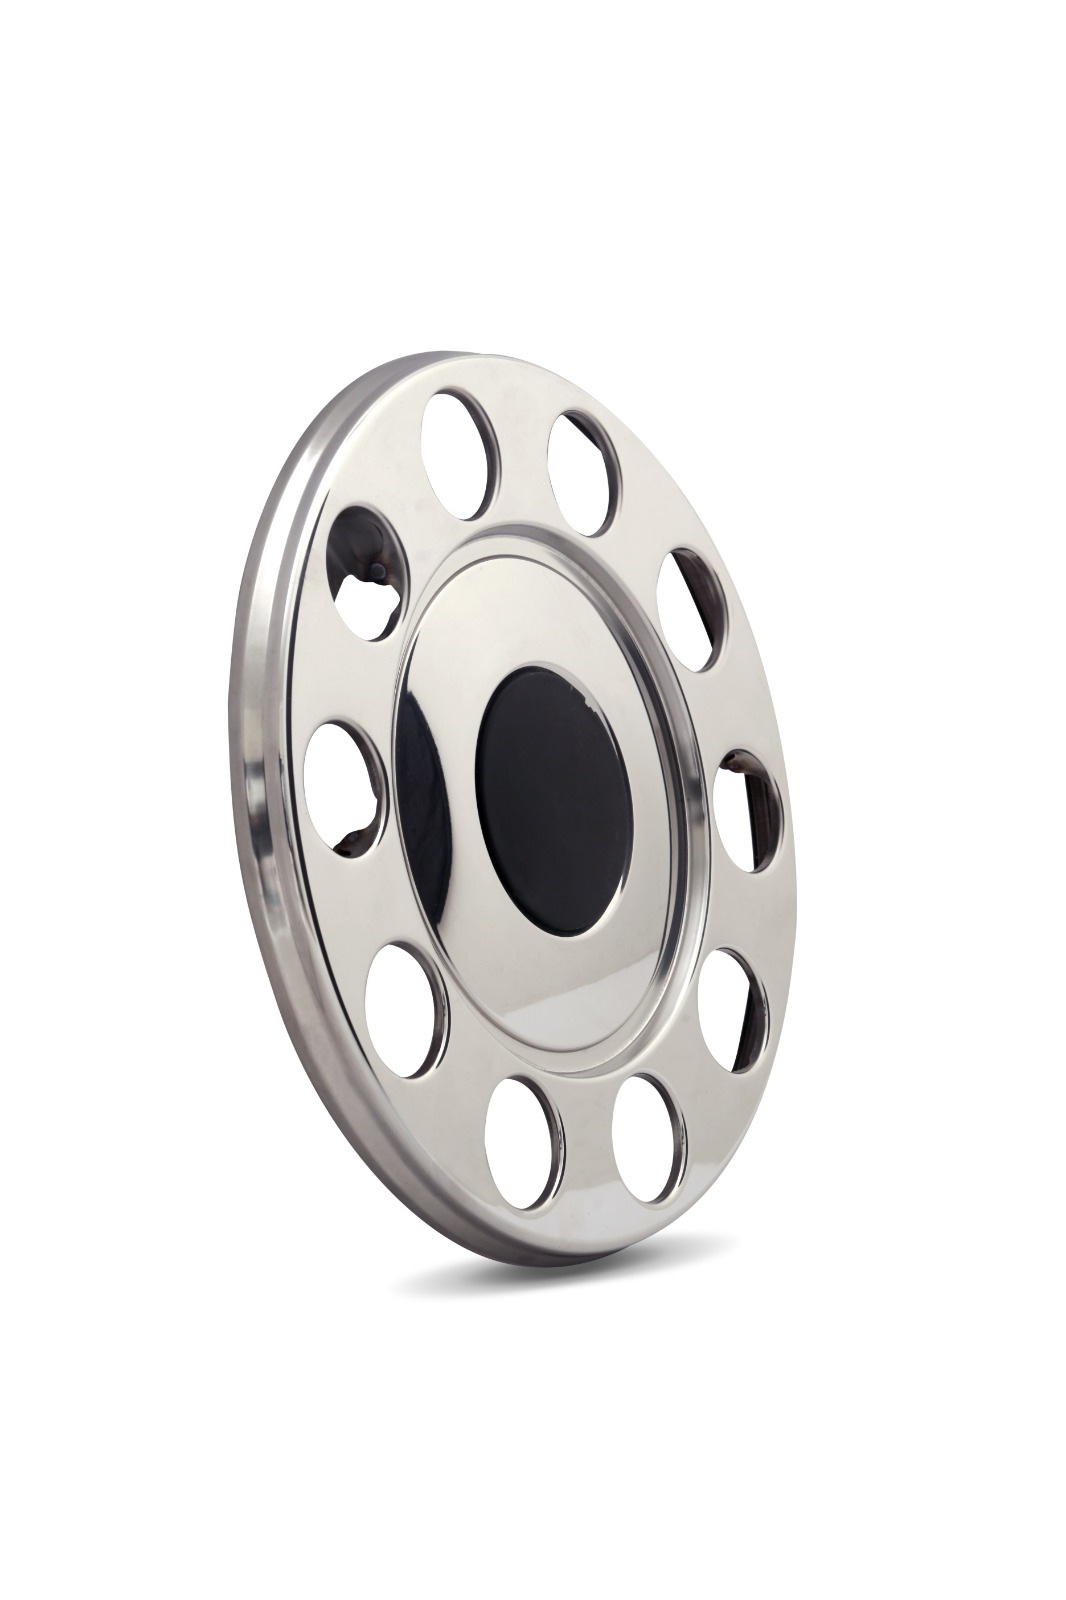 22,5 Stainless Steel Wheel Covers  (10 STUDS) (HOLLOW),Code: C1010/5